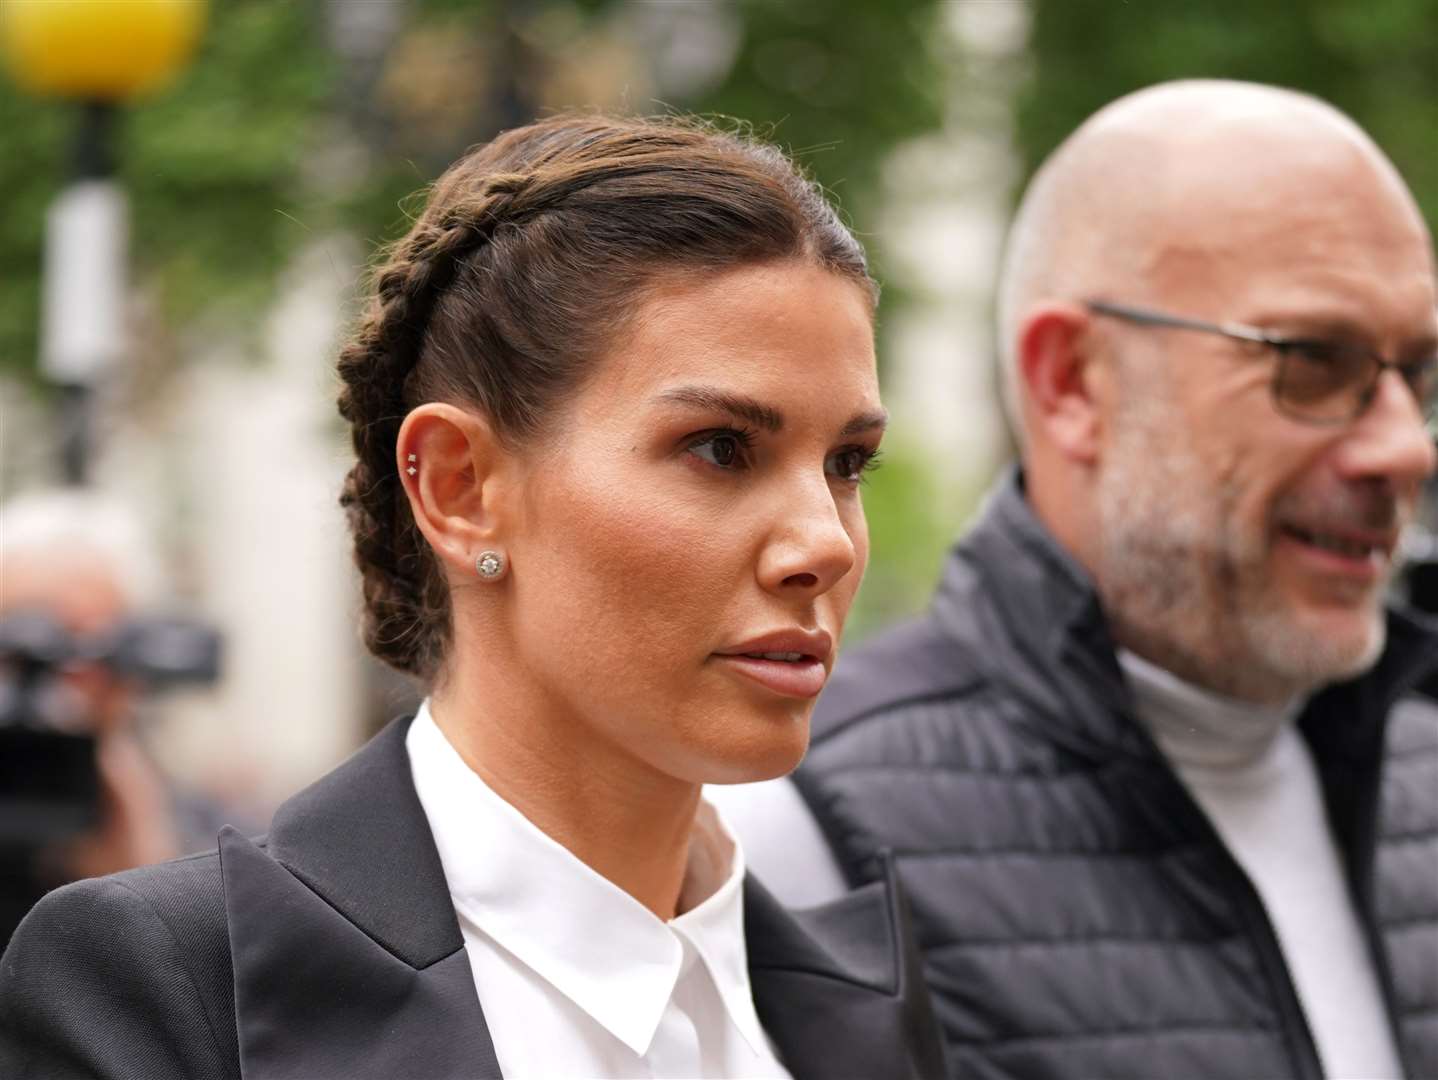 Rebekah Vardy arrives at the Royal Courts Of Justice in London (Yui Mok/PA)